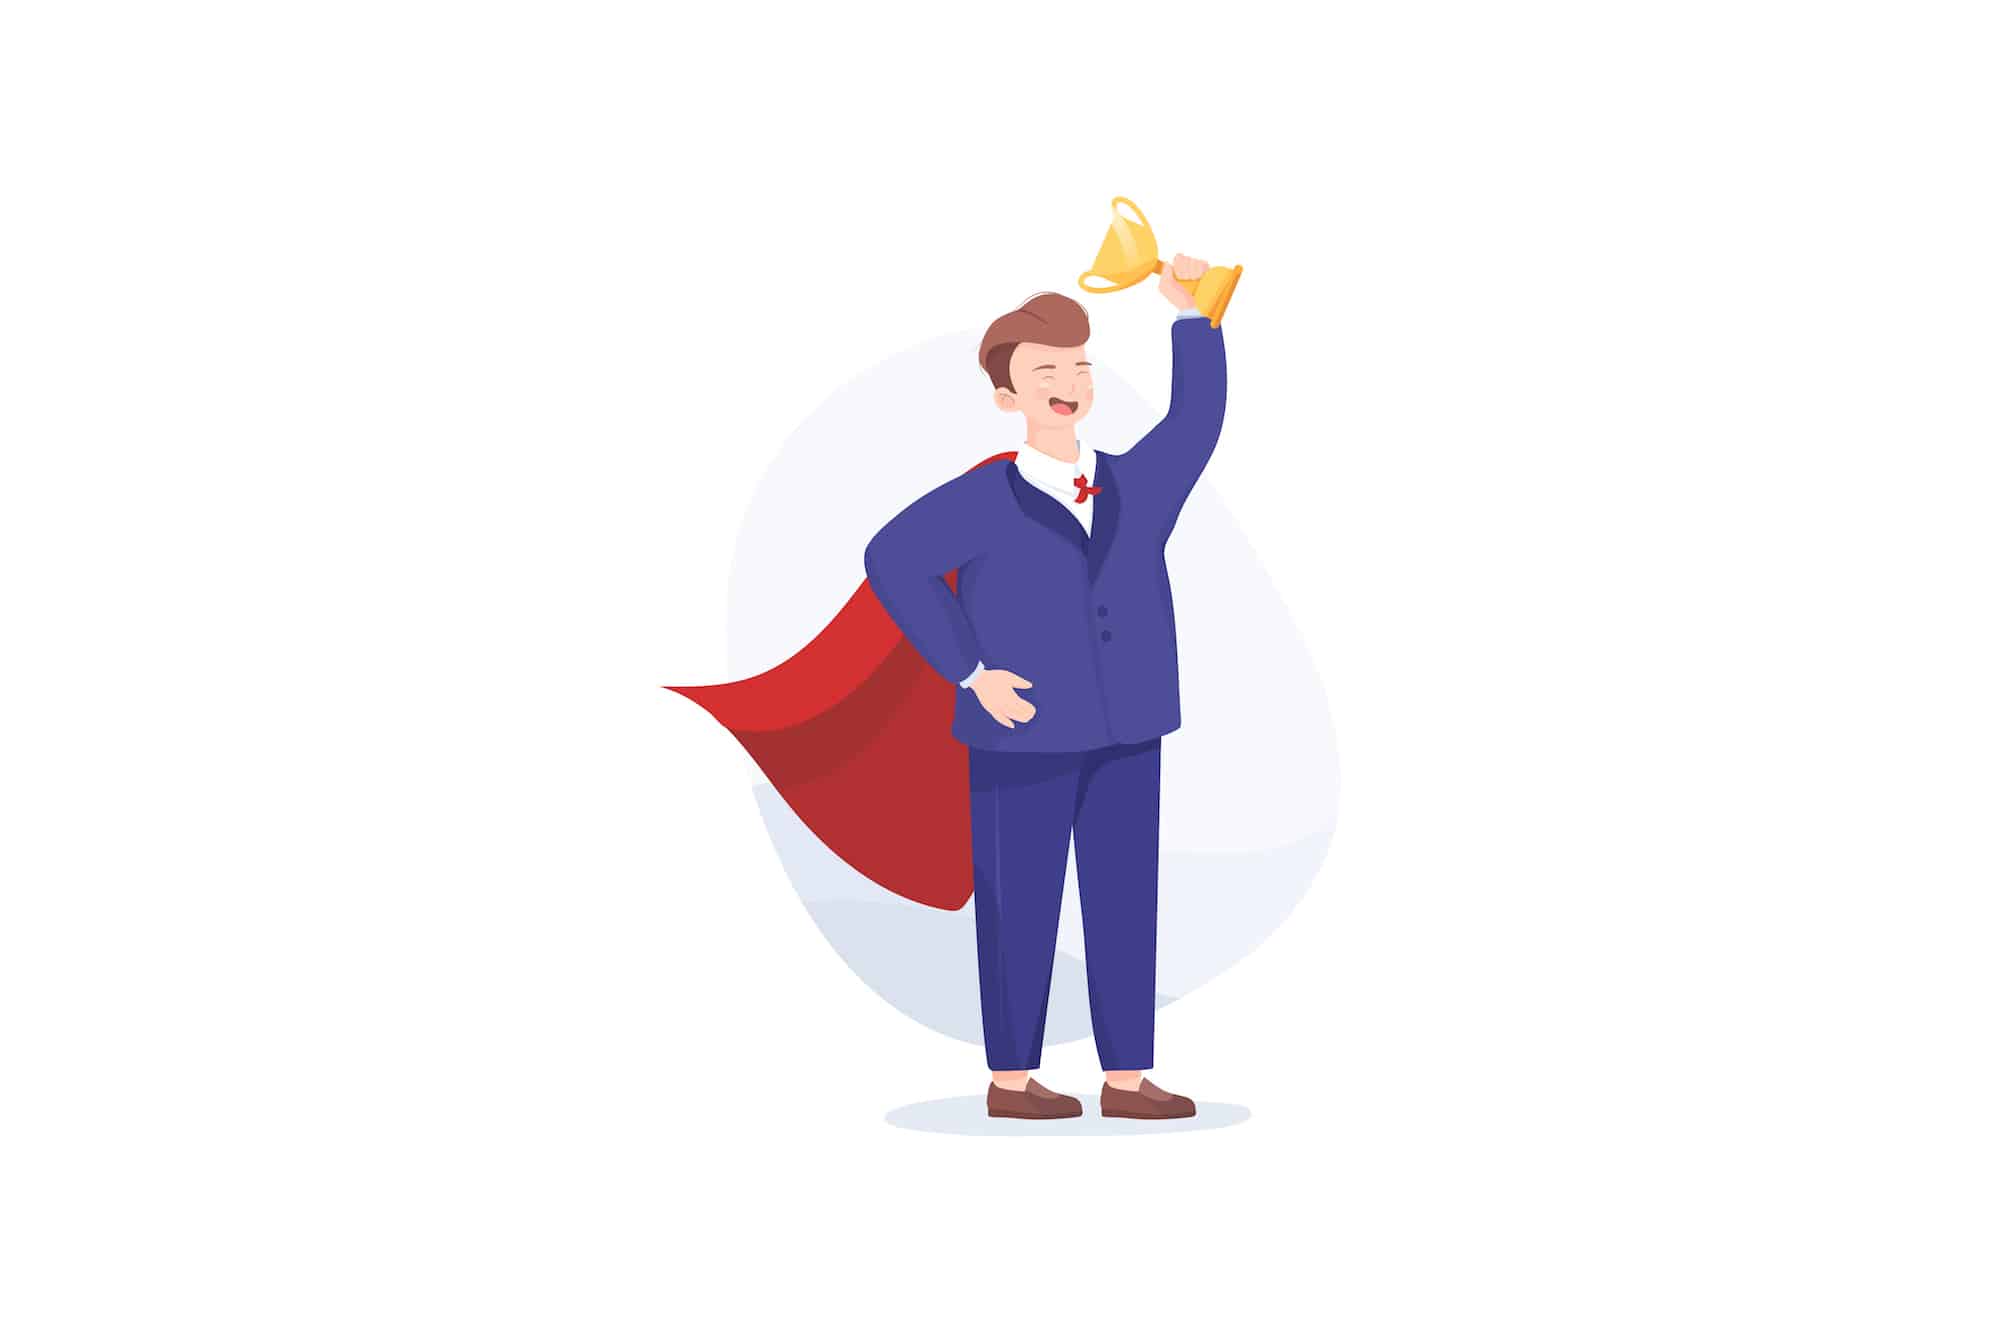 Illustration of a telecom businessman holding a trophy in the air